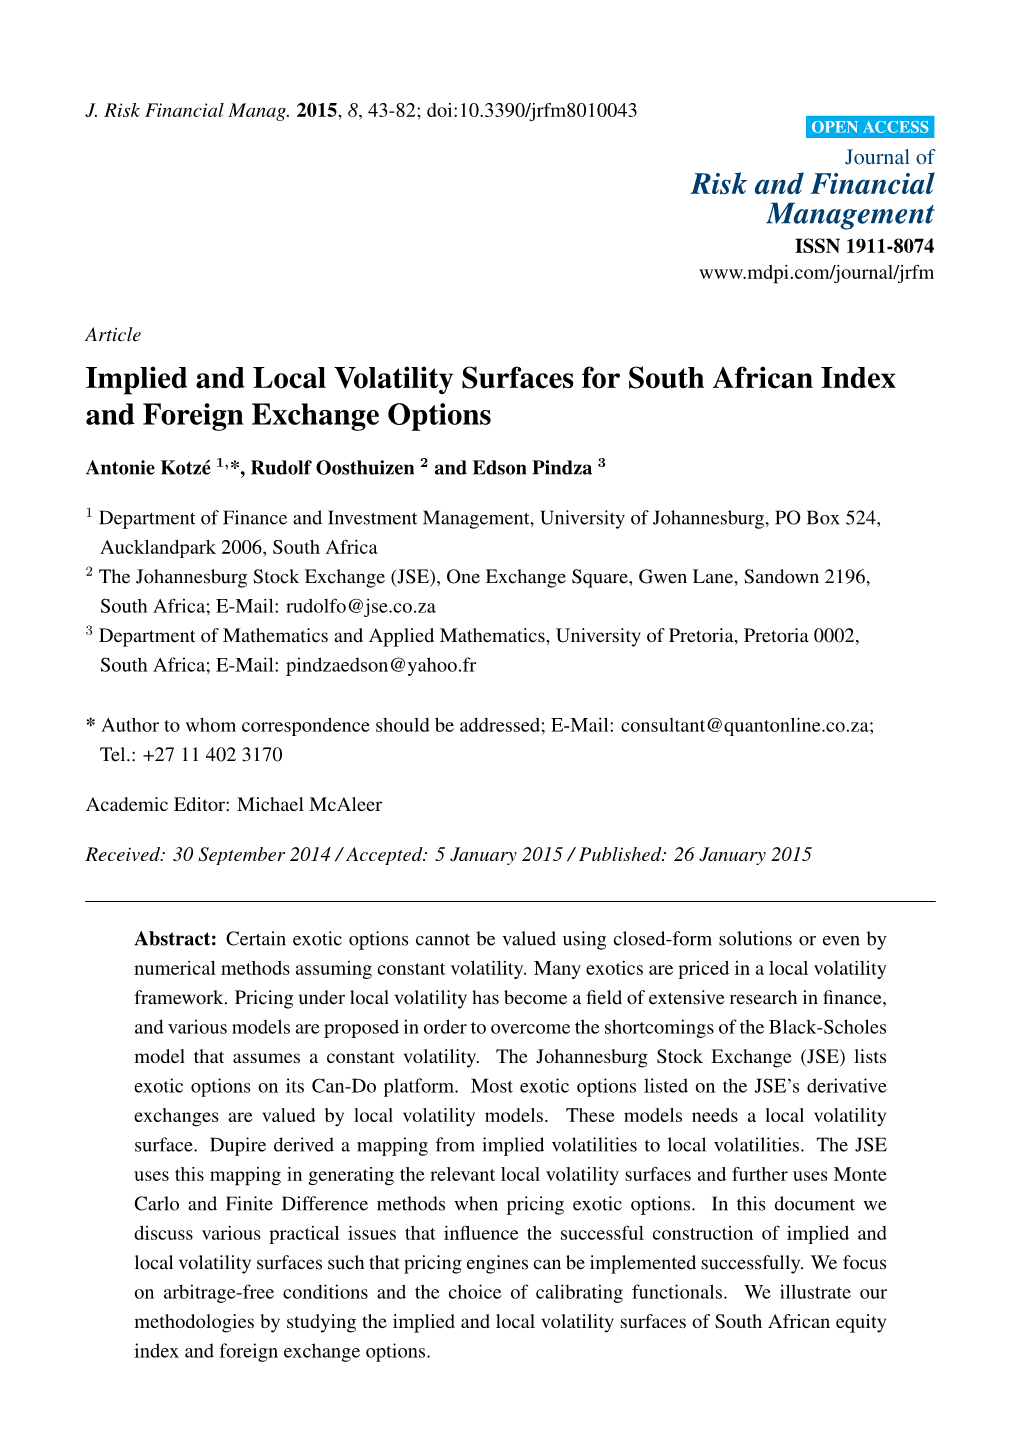 Implied and Local Volatility Surfaces for South African Index and Foreign Exchange Options